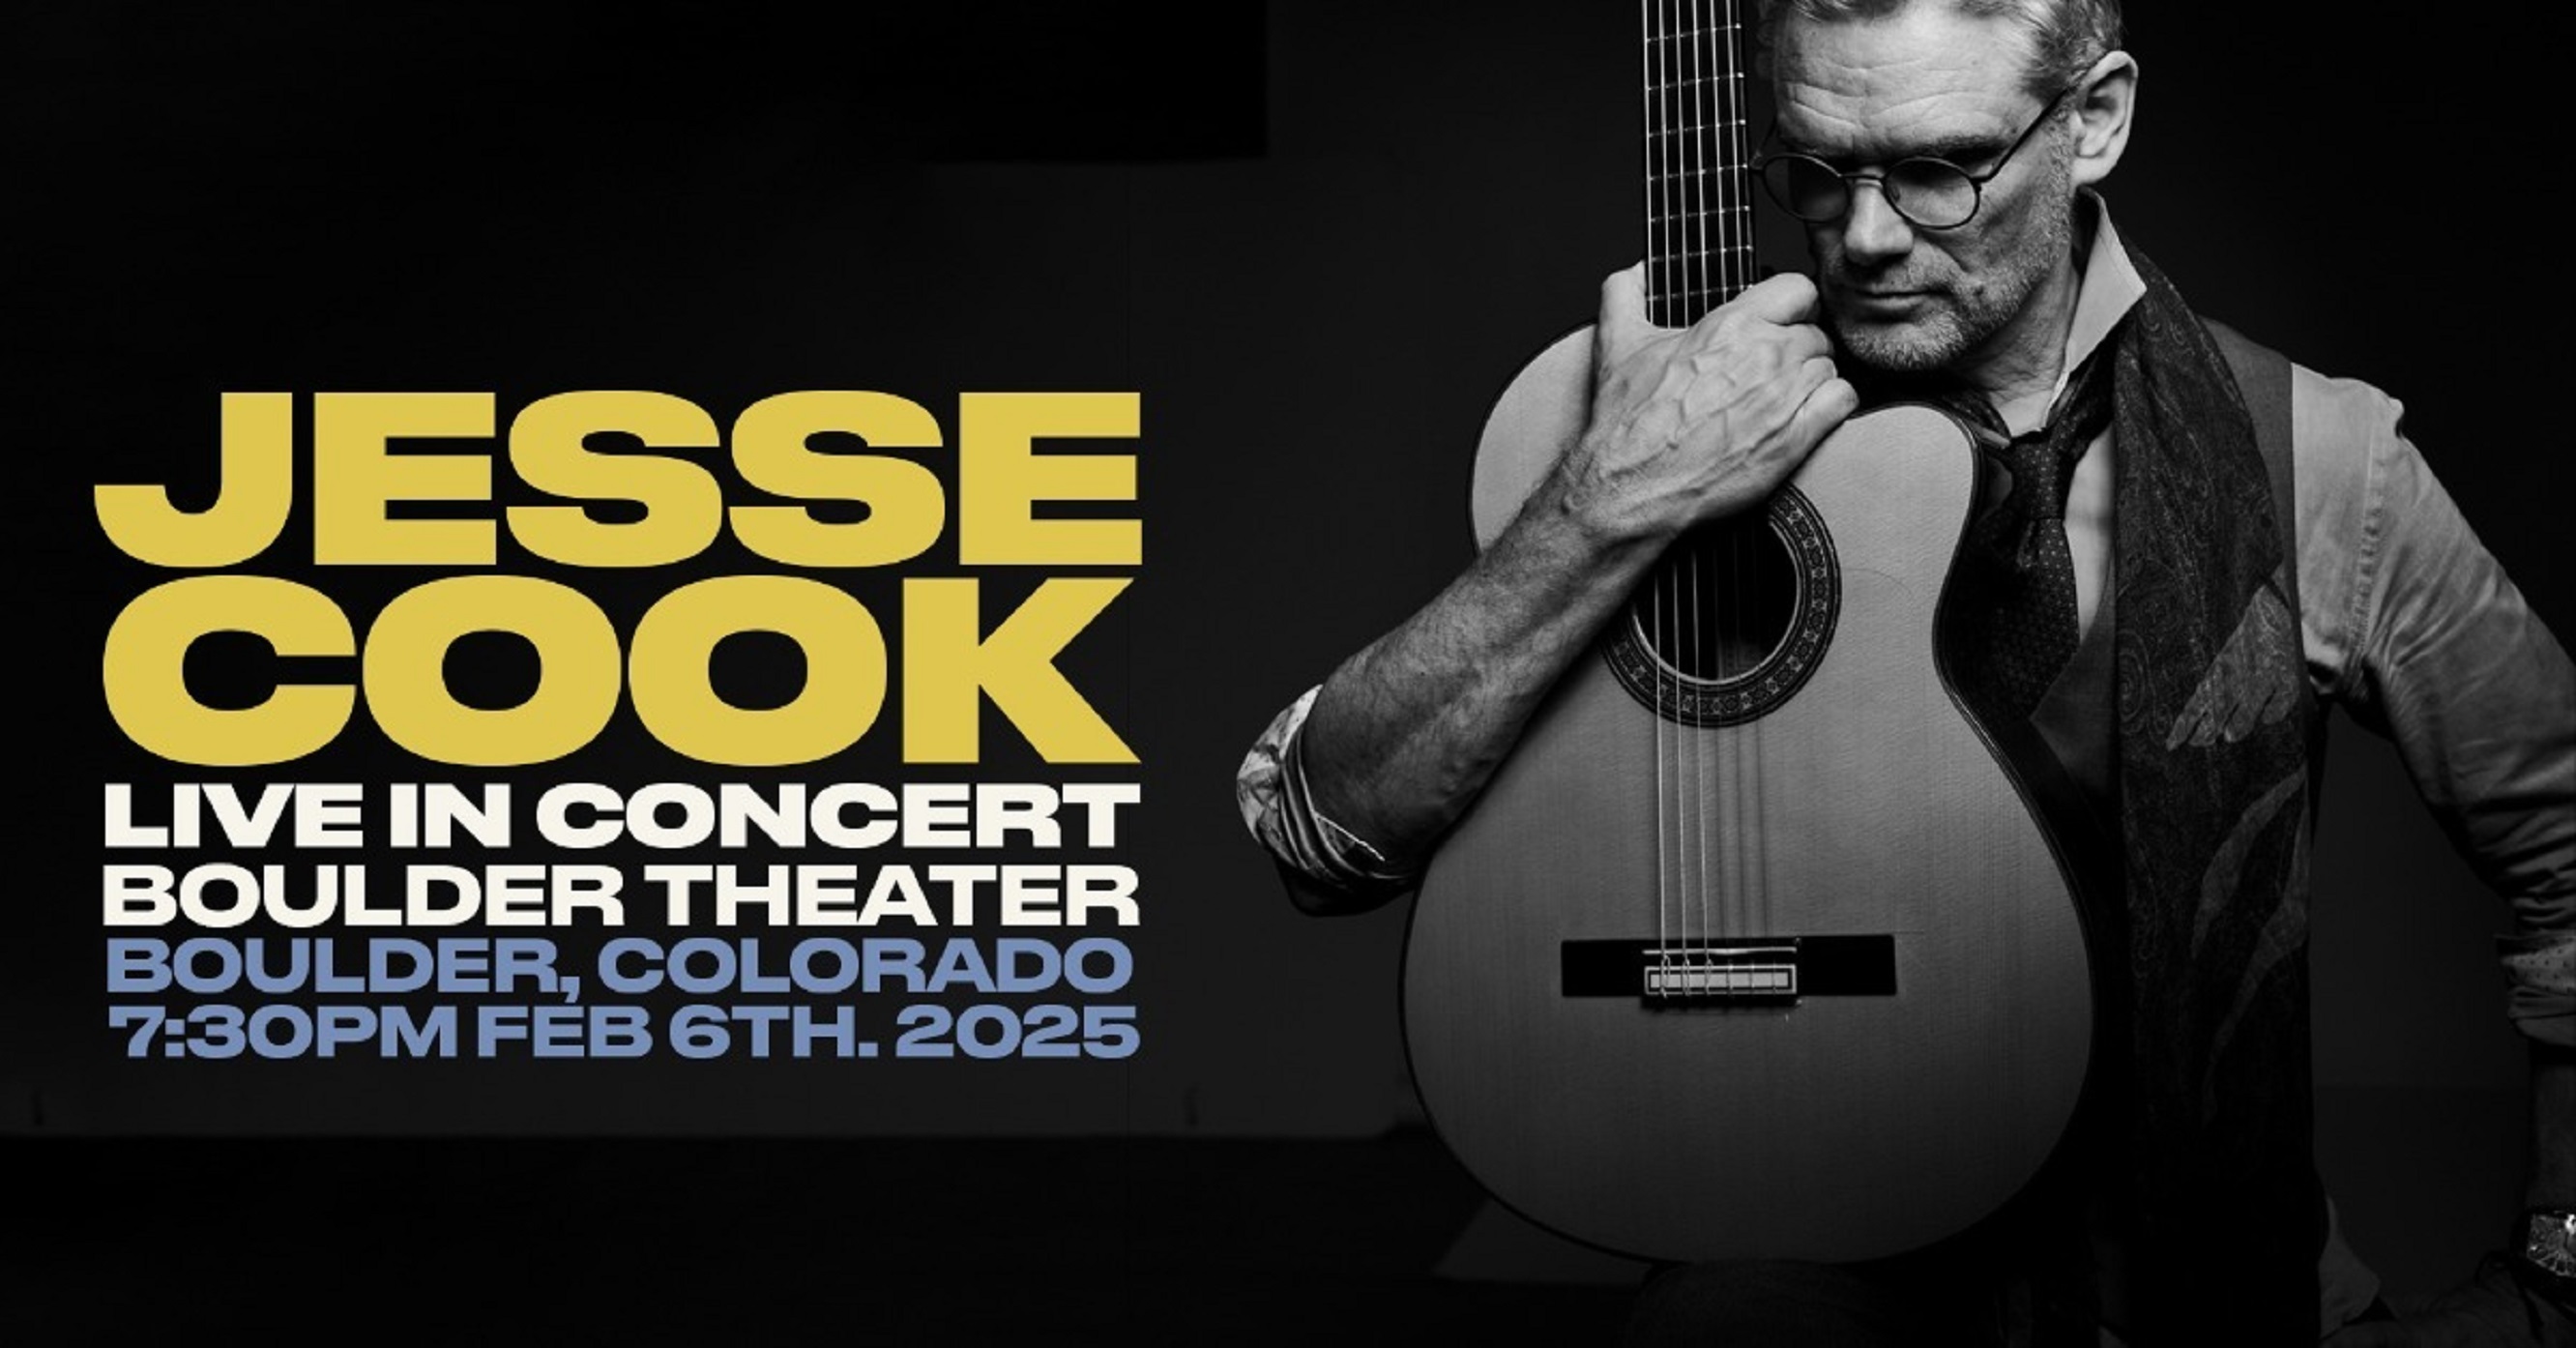 JESSE COOK RETURNS TO BOULDER THEATER FOR A SPECTACULAR PERFORMANCE